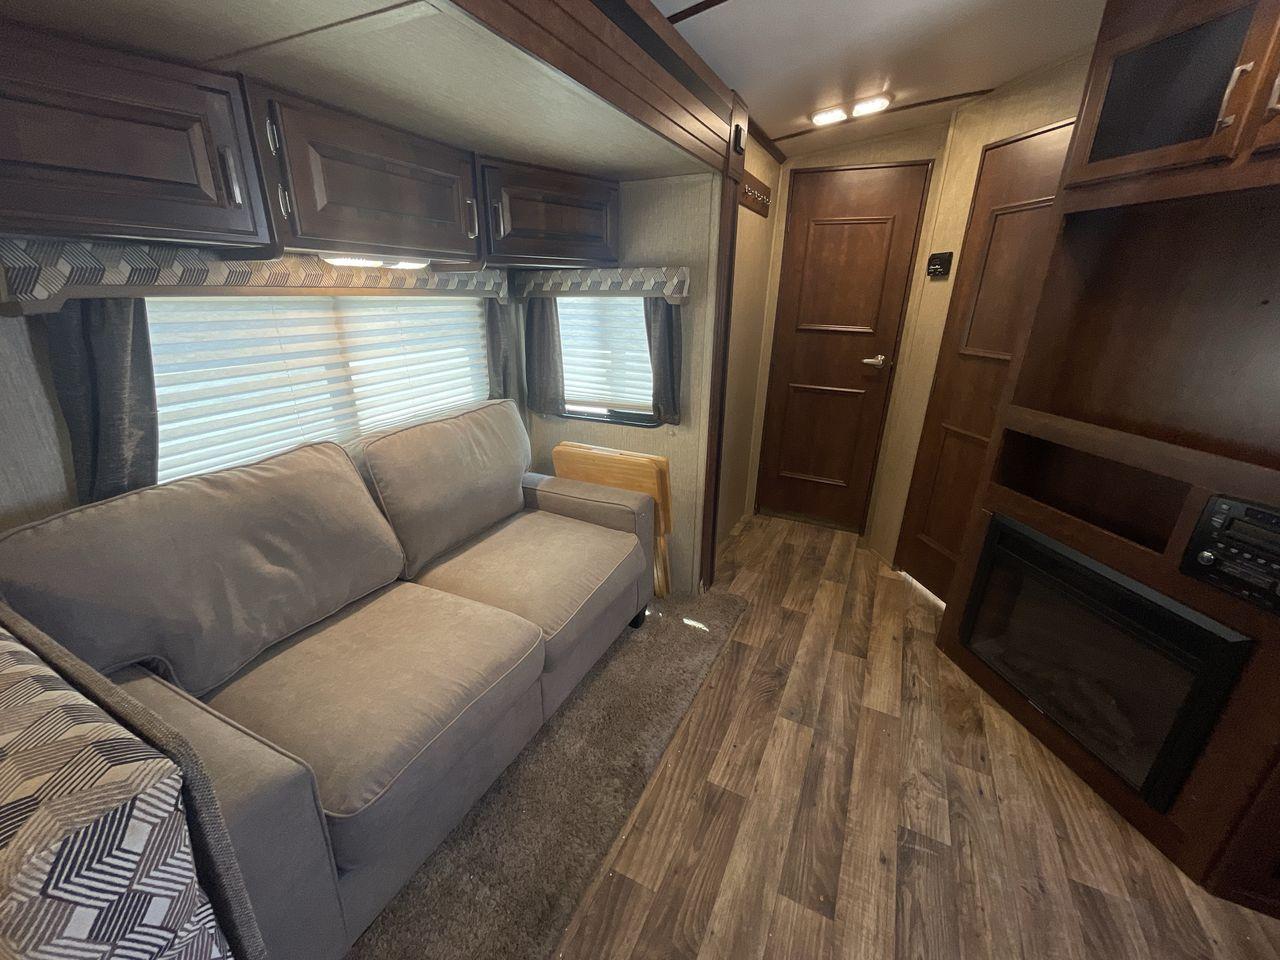 2018 BLACK KEYSTONE RV OUTBACK 325BH (4YDT32520JB) , Length: 37.42 ft. | Dry Weight: 8,428 lbs. | Gross Weight: 10,500 lbs. | Slides: 3 transmission, located at 4319 N Main St, Cleburne, TX, 76033, (817) 678-5133, 32.385960, -97.391212 - Gather the family inside this Outback Super Lite 325BH by Keystone RV, which features a bunkhouse, front bedroom, outside kitchen, and triple slides. The dimensions of this 325BH model are 37.42 ft in length, 8 ft in width, and 11.33 ft in height. It has a dry weight of 8,428 lbs with a payload capa - Photo #13